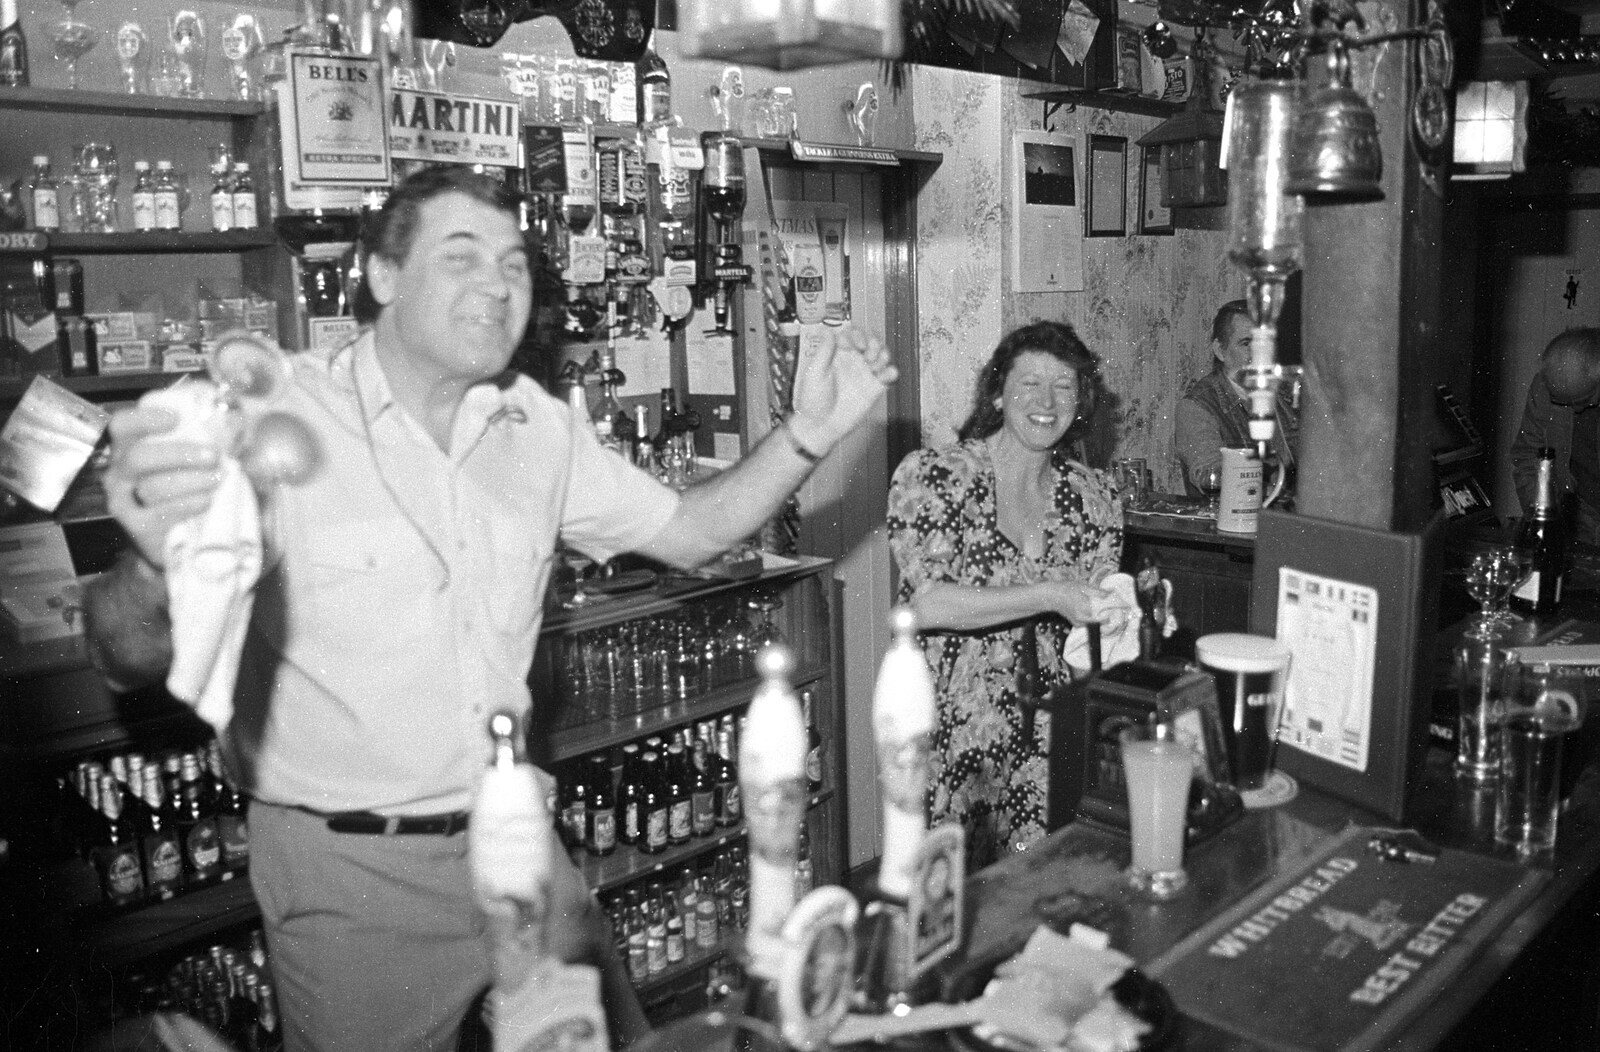 Alan dances behind the bar from New Year's Eve at the Swan Inn, Brome, Suffolk - 31st December 1992